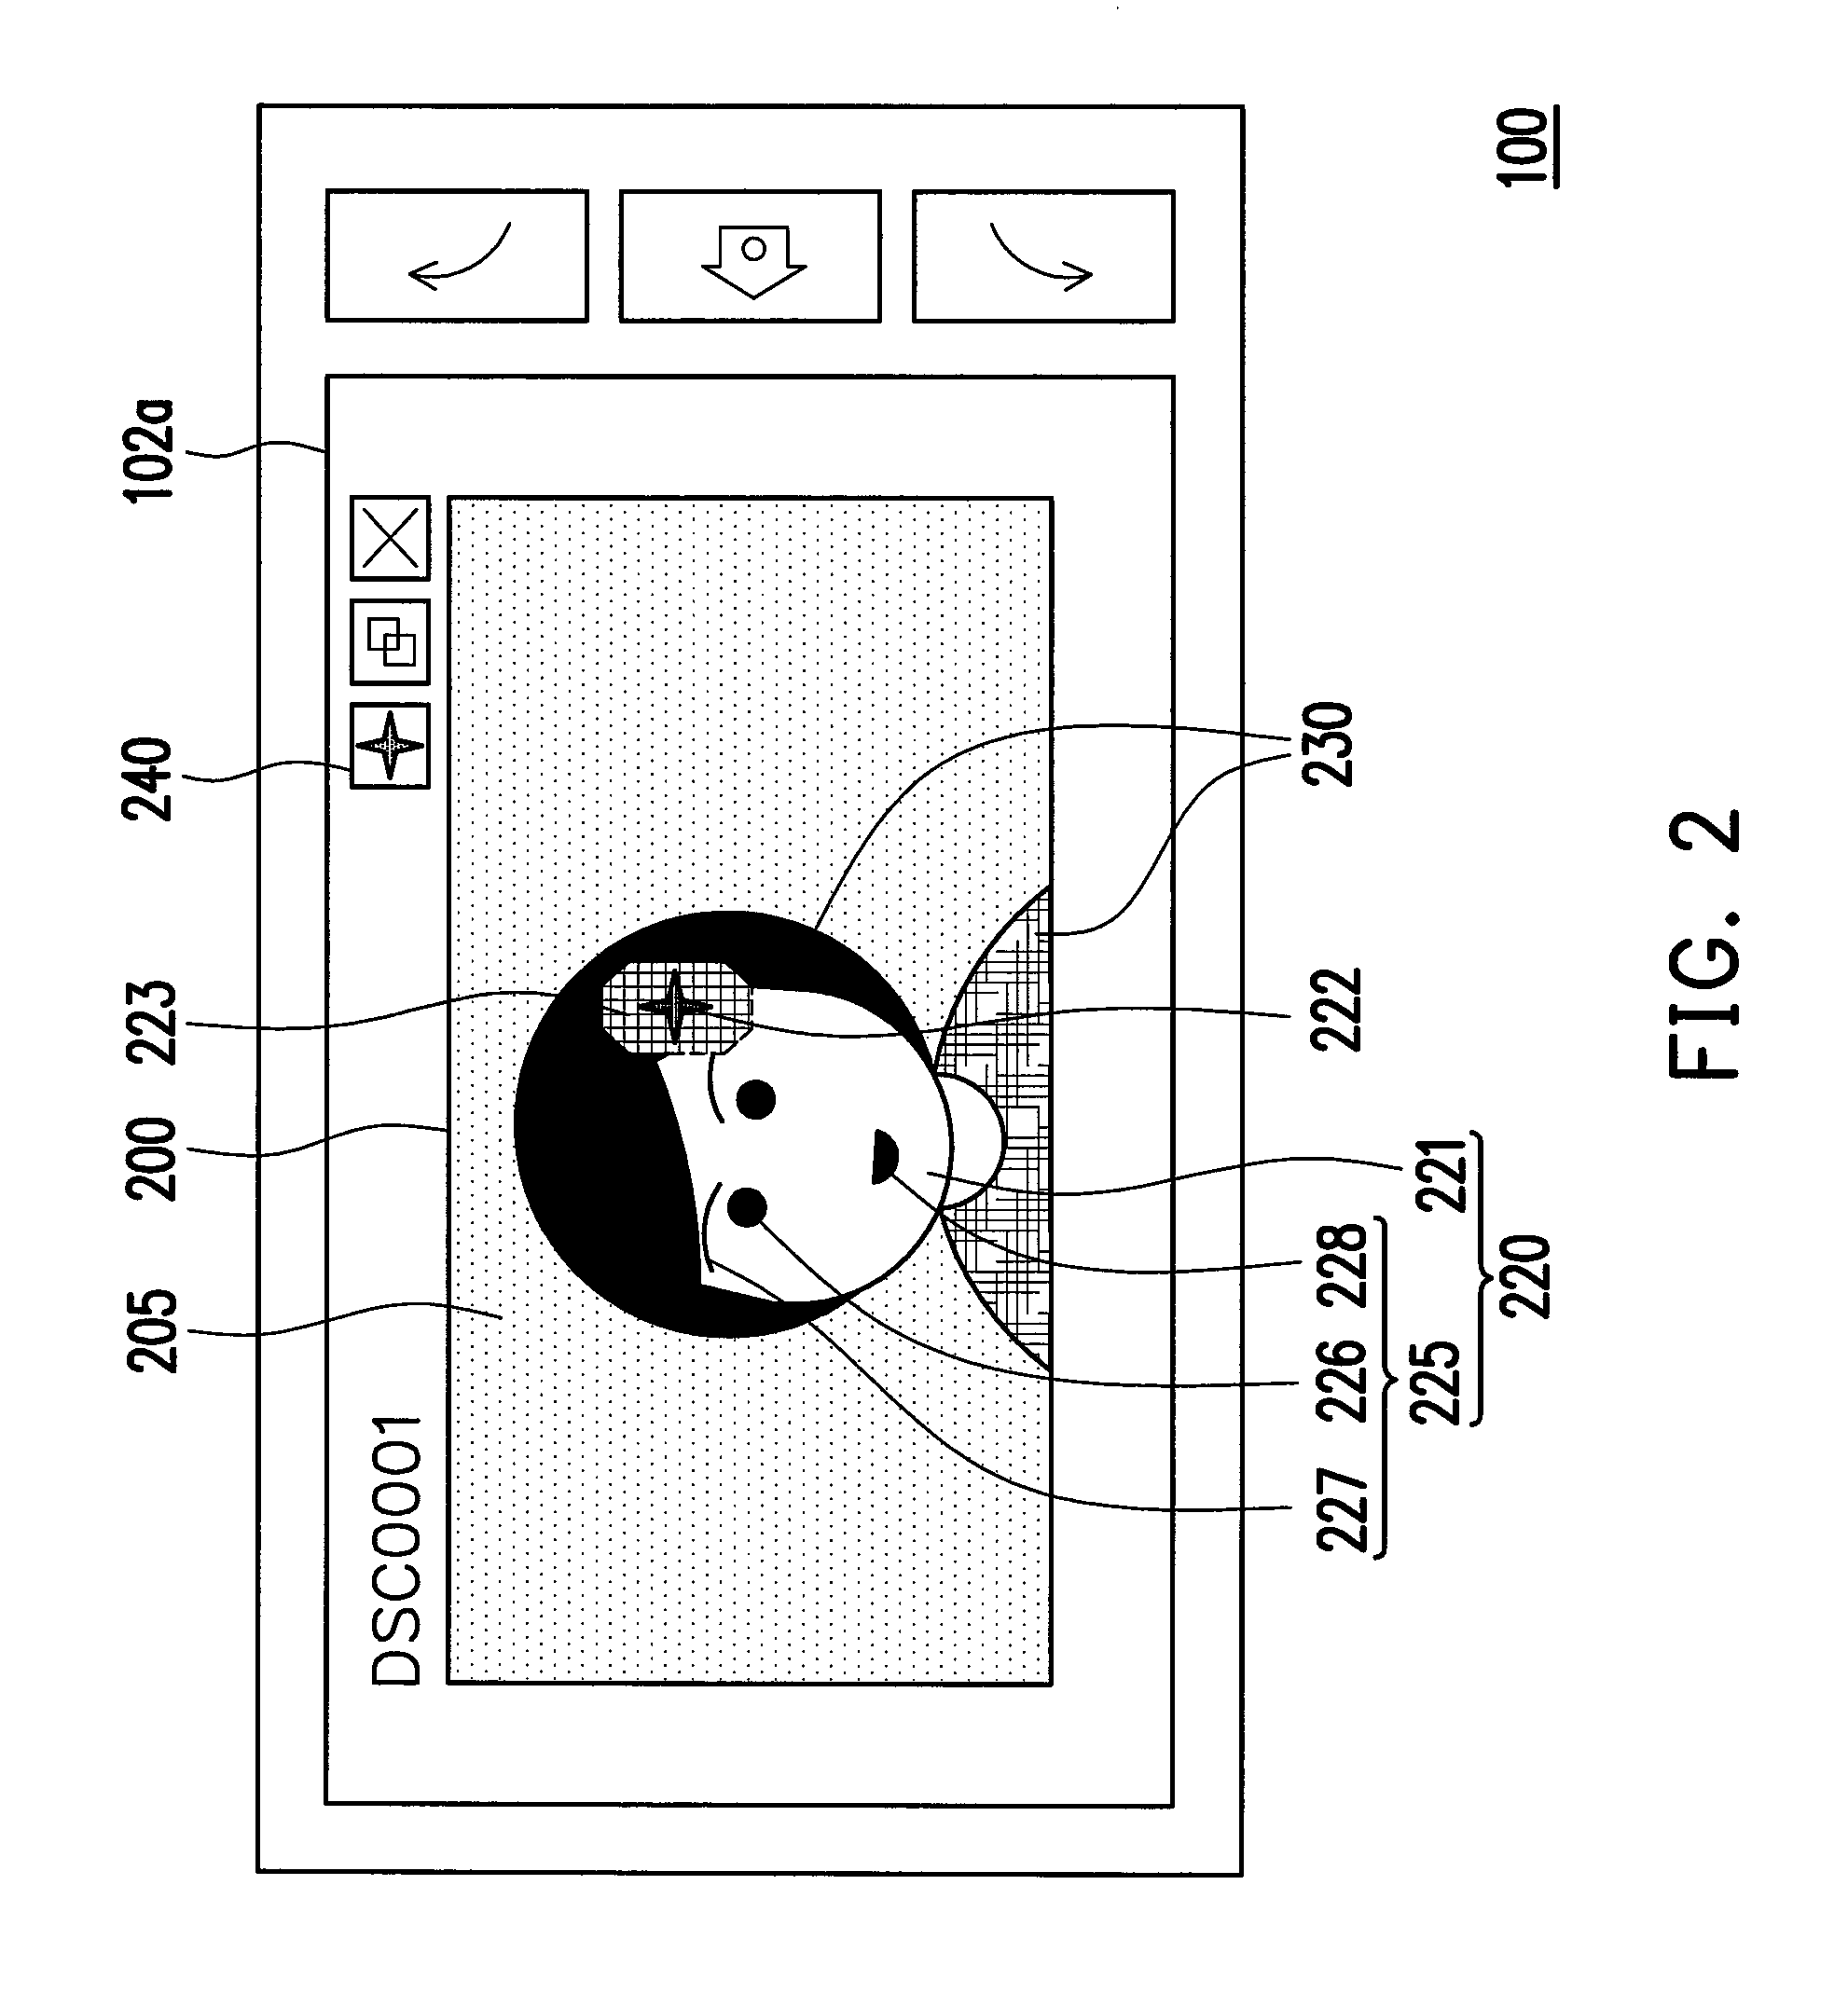 Method and device for detecting glare pixels of image